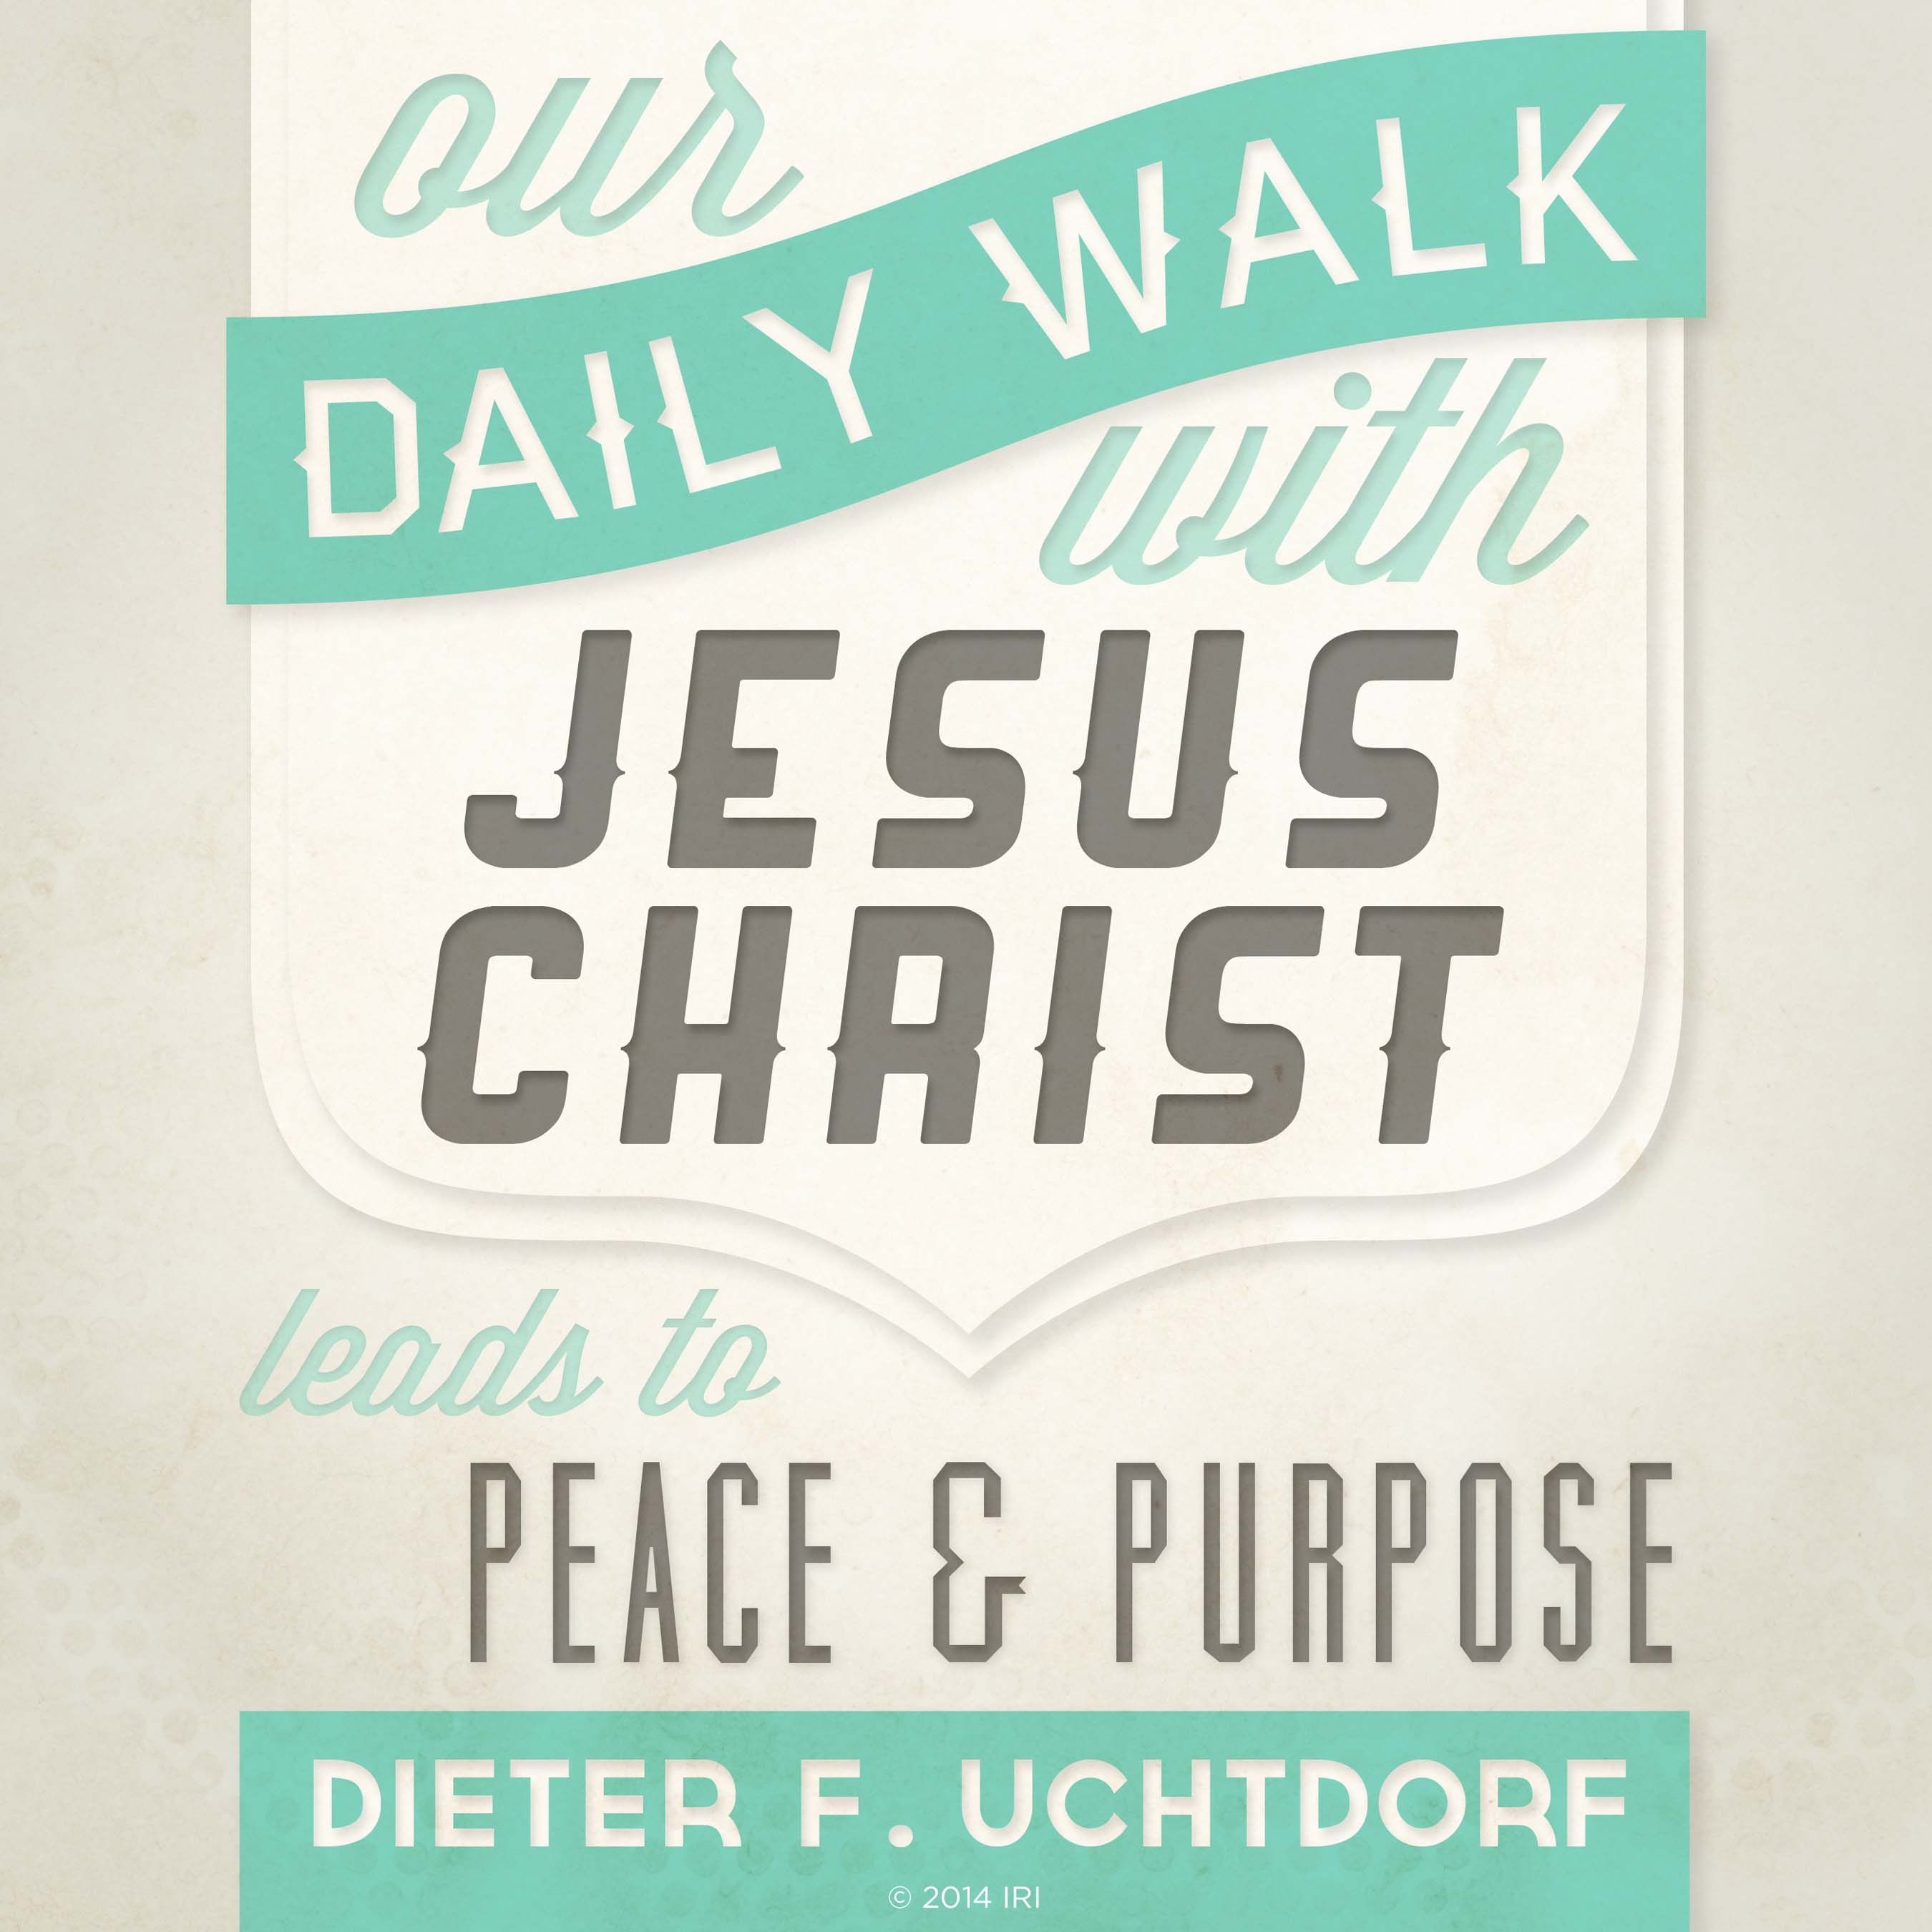 “Our daily walk with Jesus Christ leads to peace and purpose.”—President Dieter F. Uchtdorf, “Come, Join with Us”